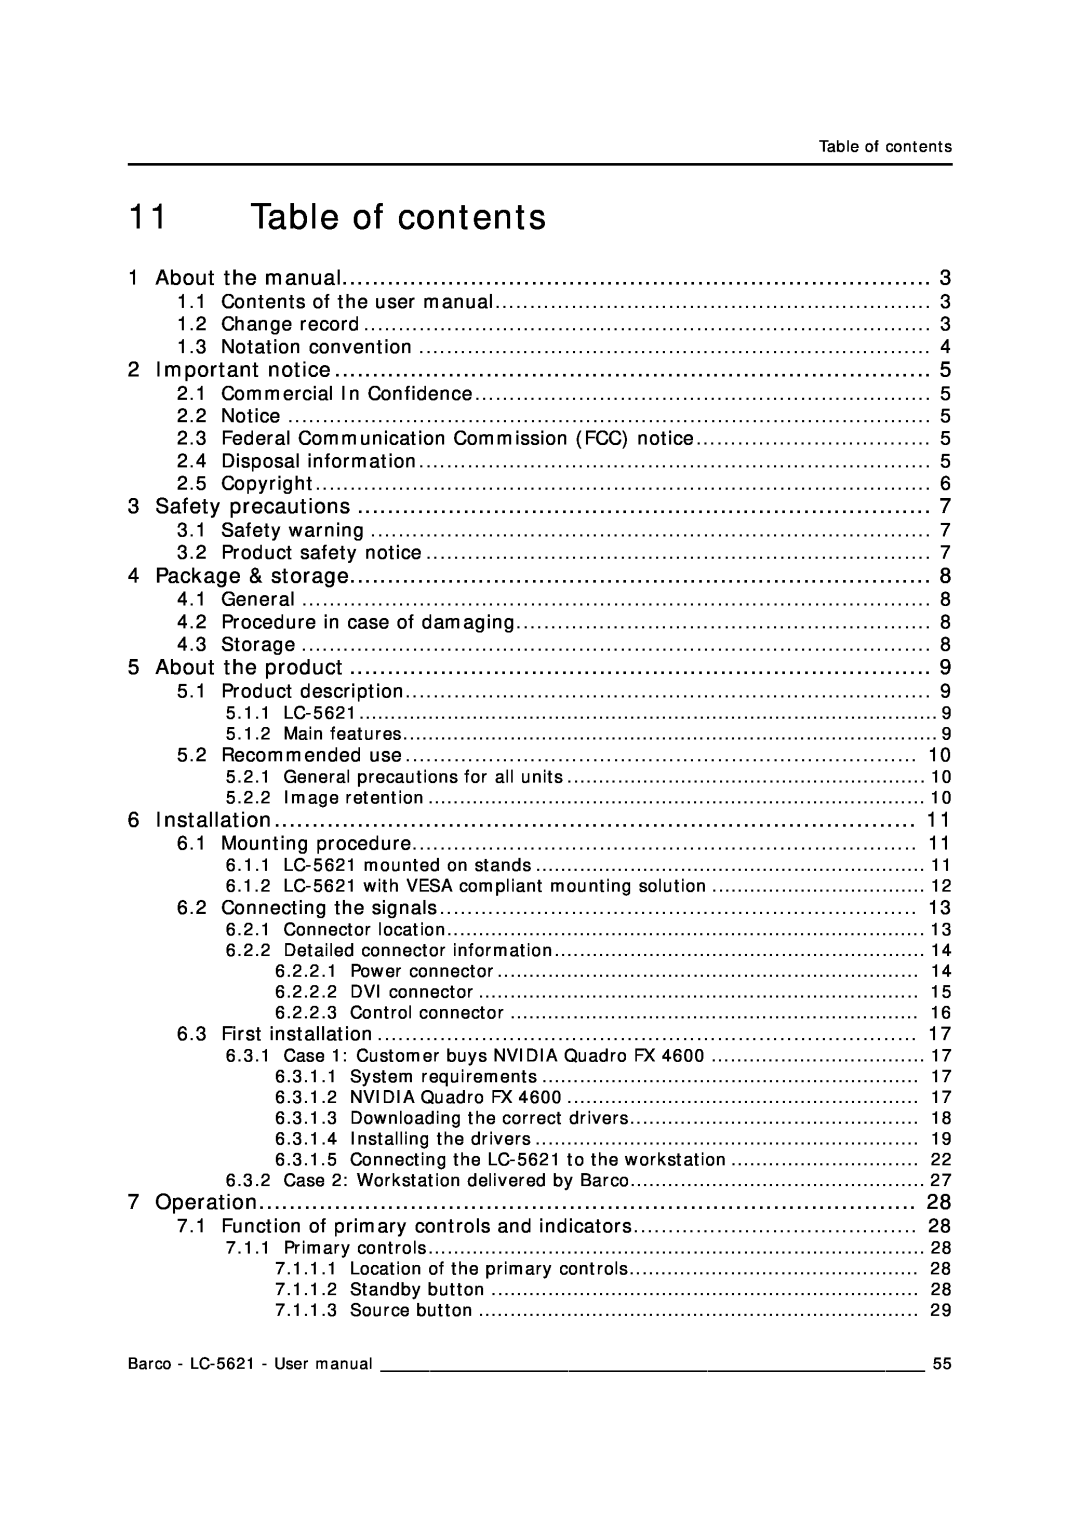 Barco LC-5621 user manual Table of contents, Installation 